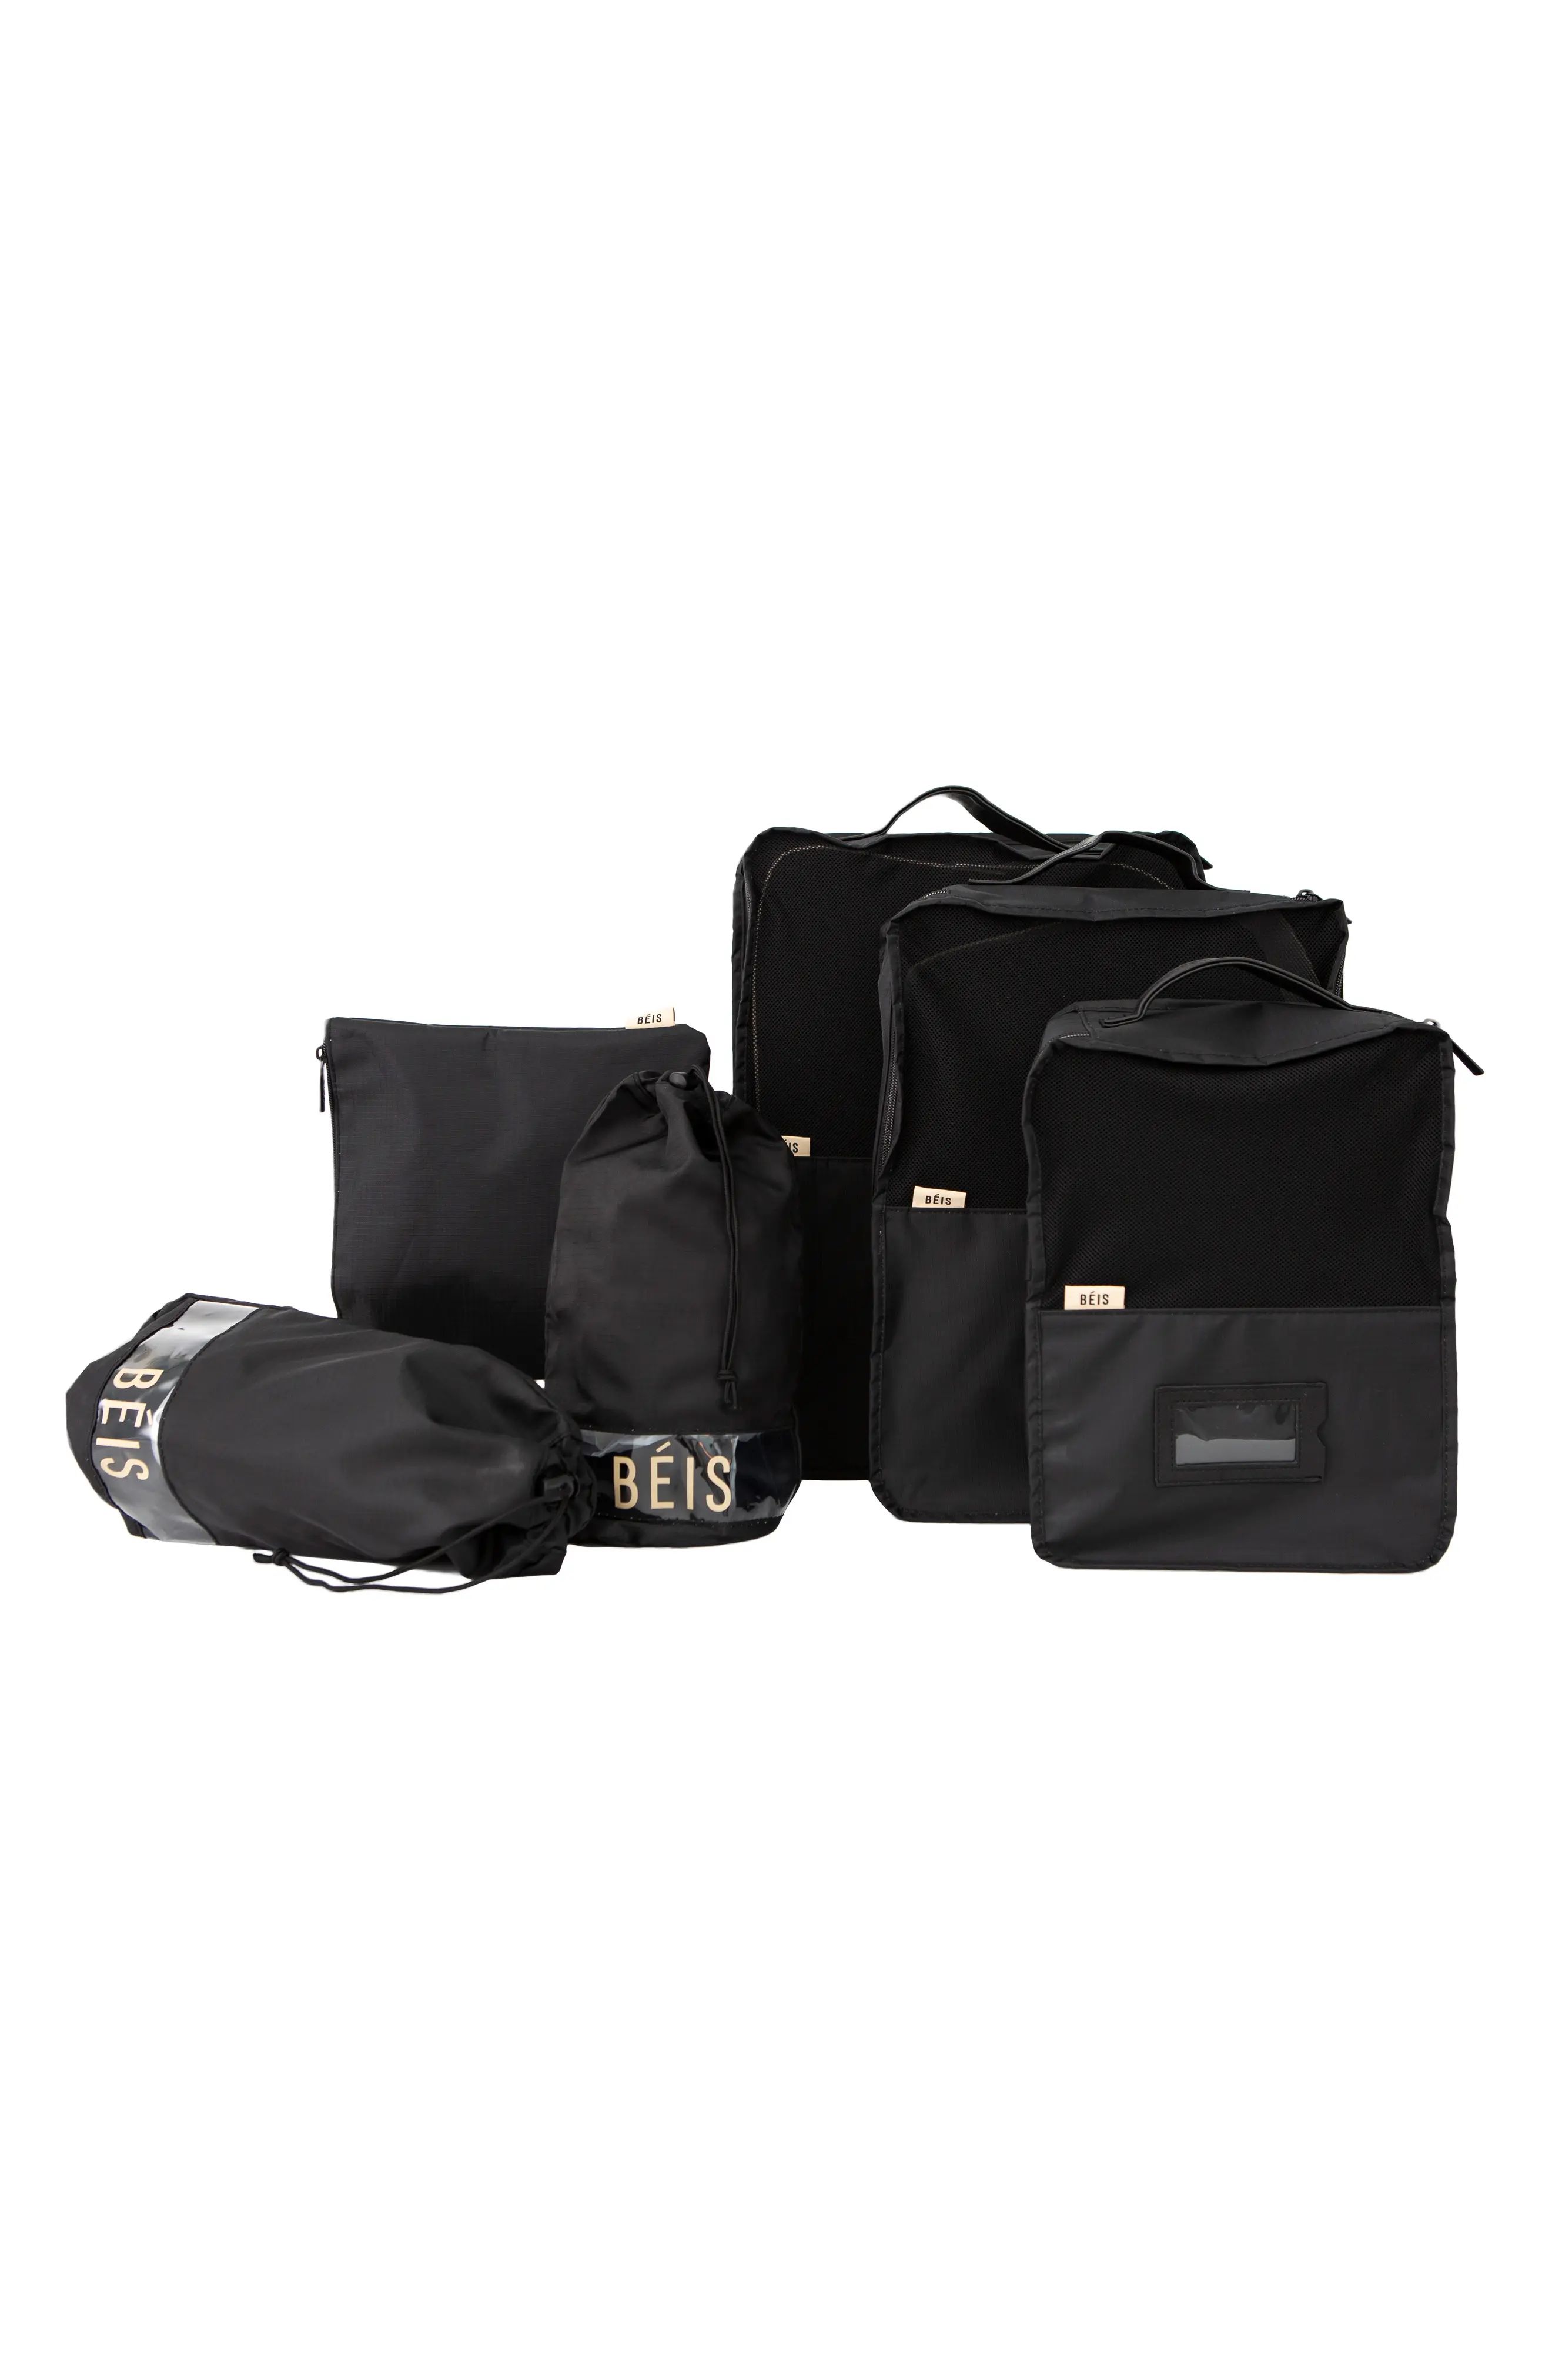 Beis The Packing Cubes - Black (Nordstrom Exclusive) | Nordstrom